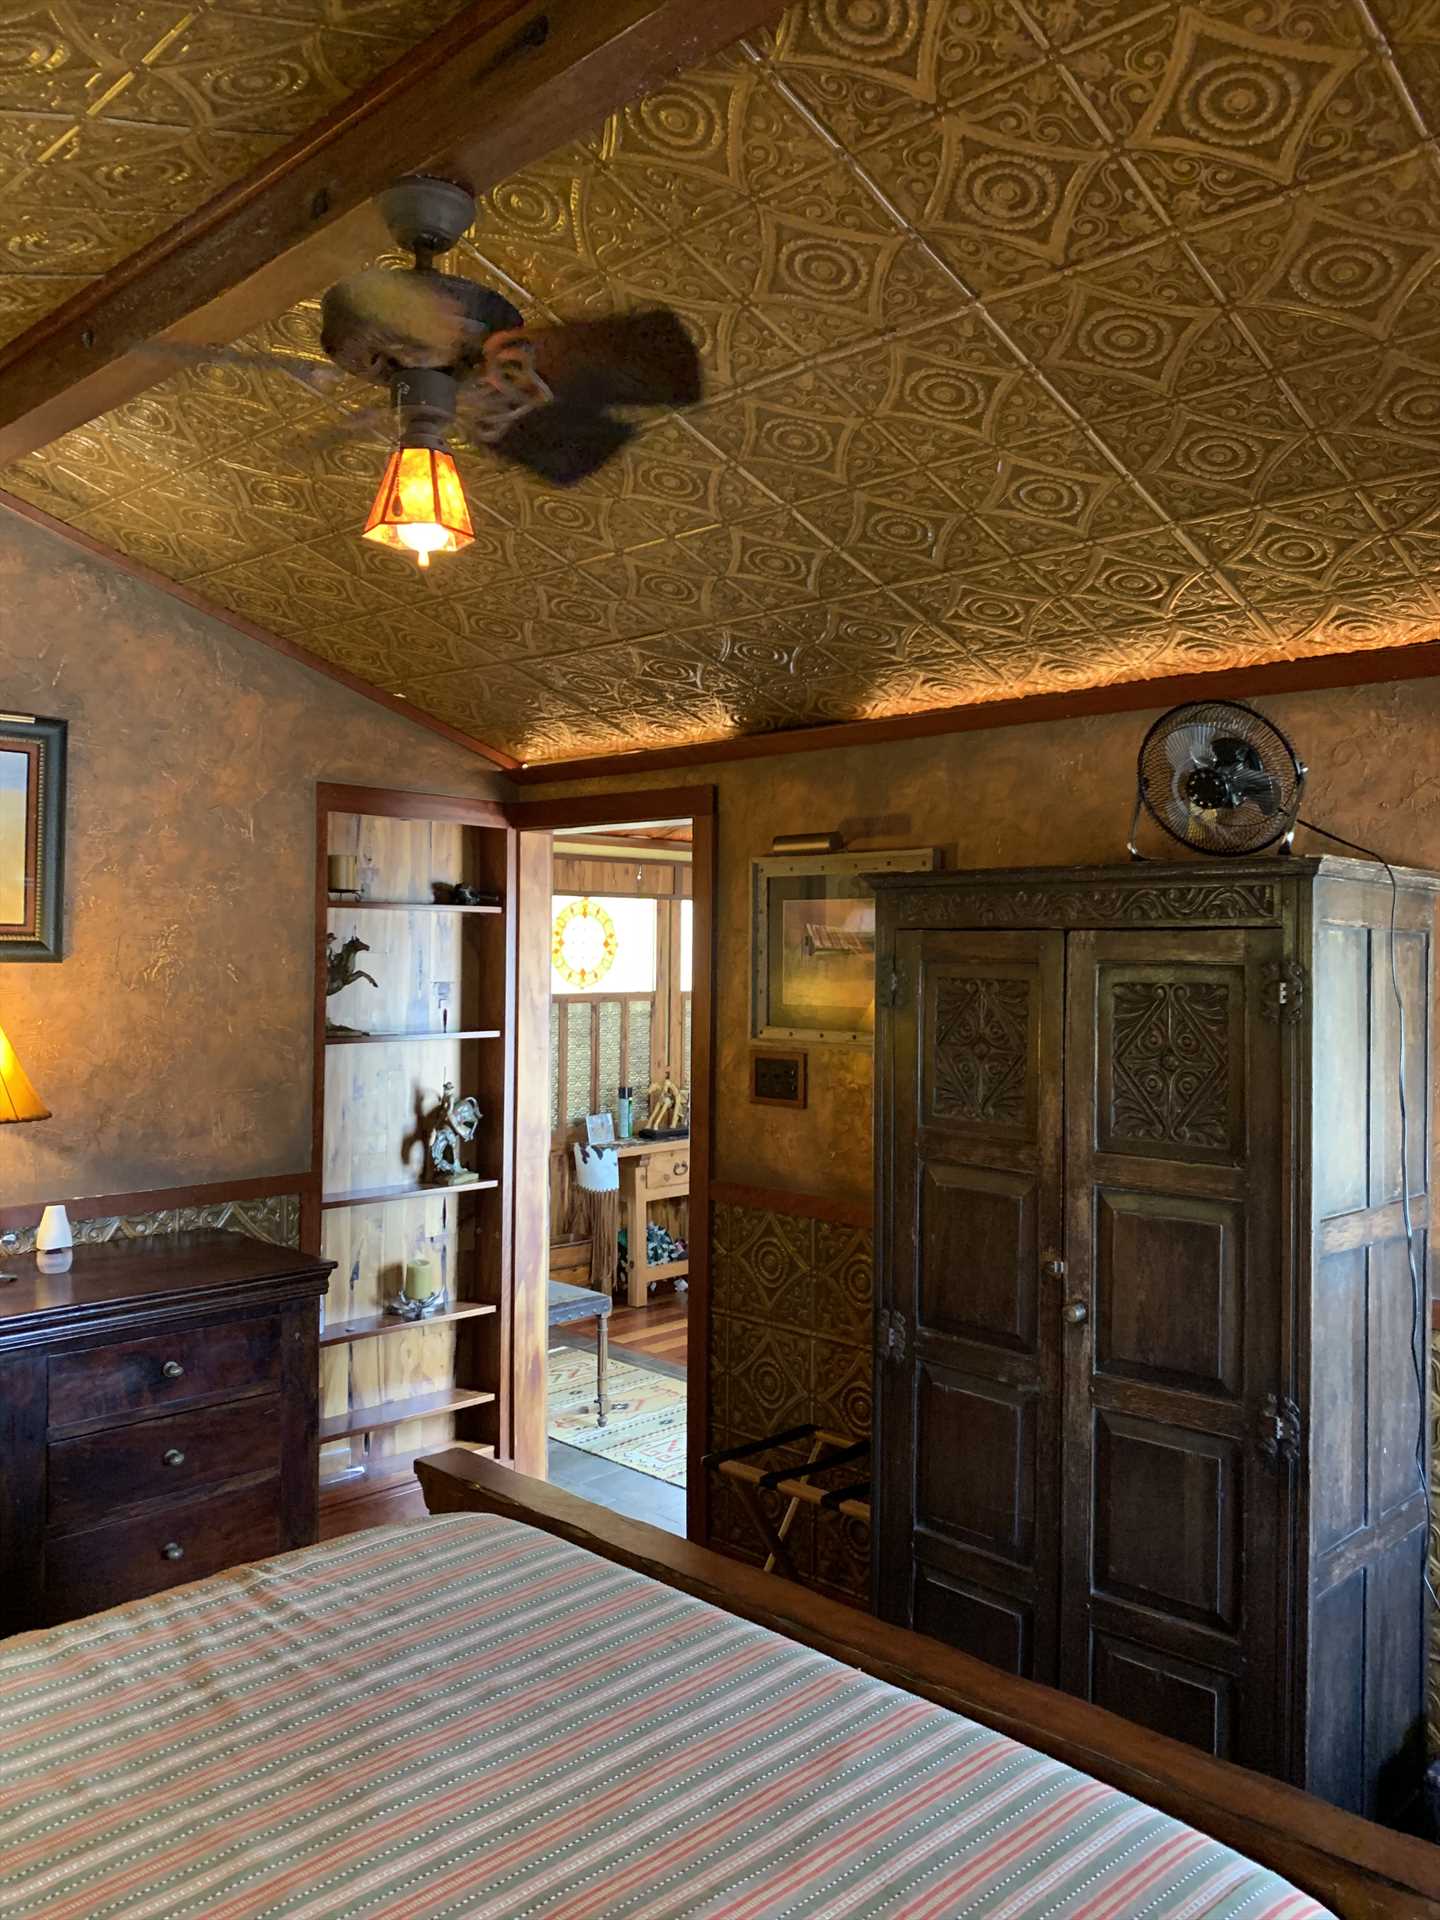                                                 The delightful vintage decor continues in the bedroom, which is accented by charming tin panels and a beamed ceiling!